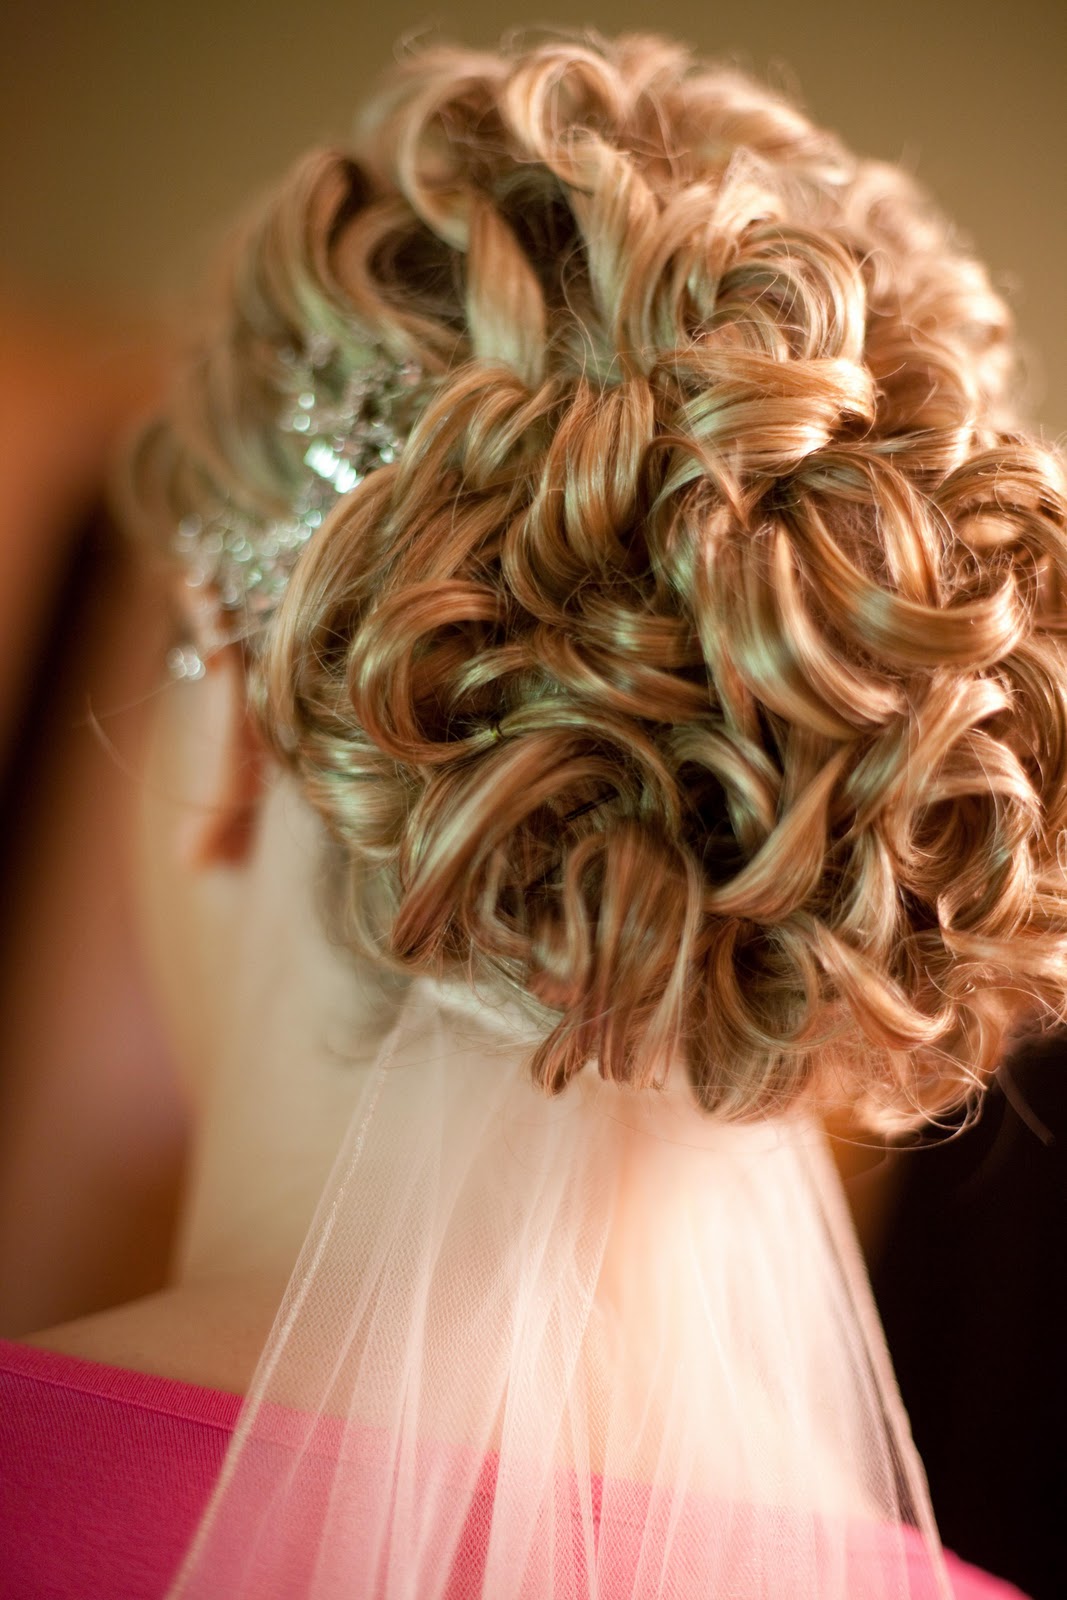 What wedding hair style will